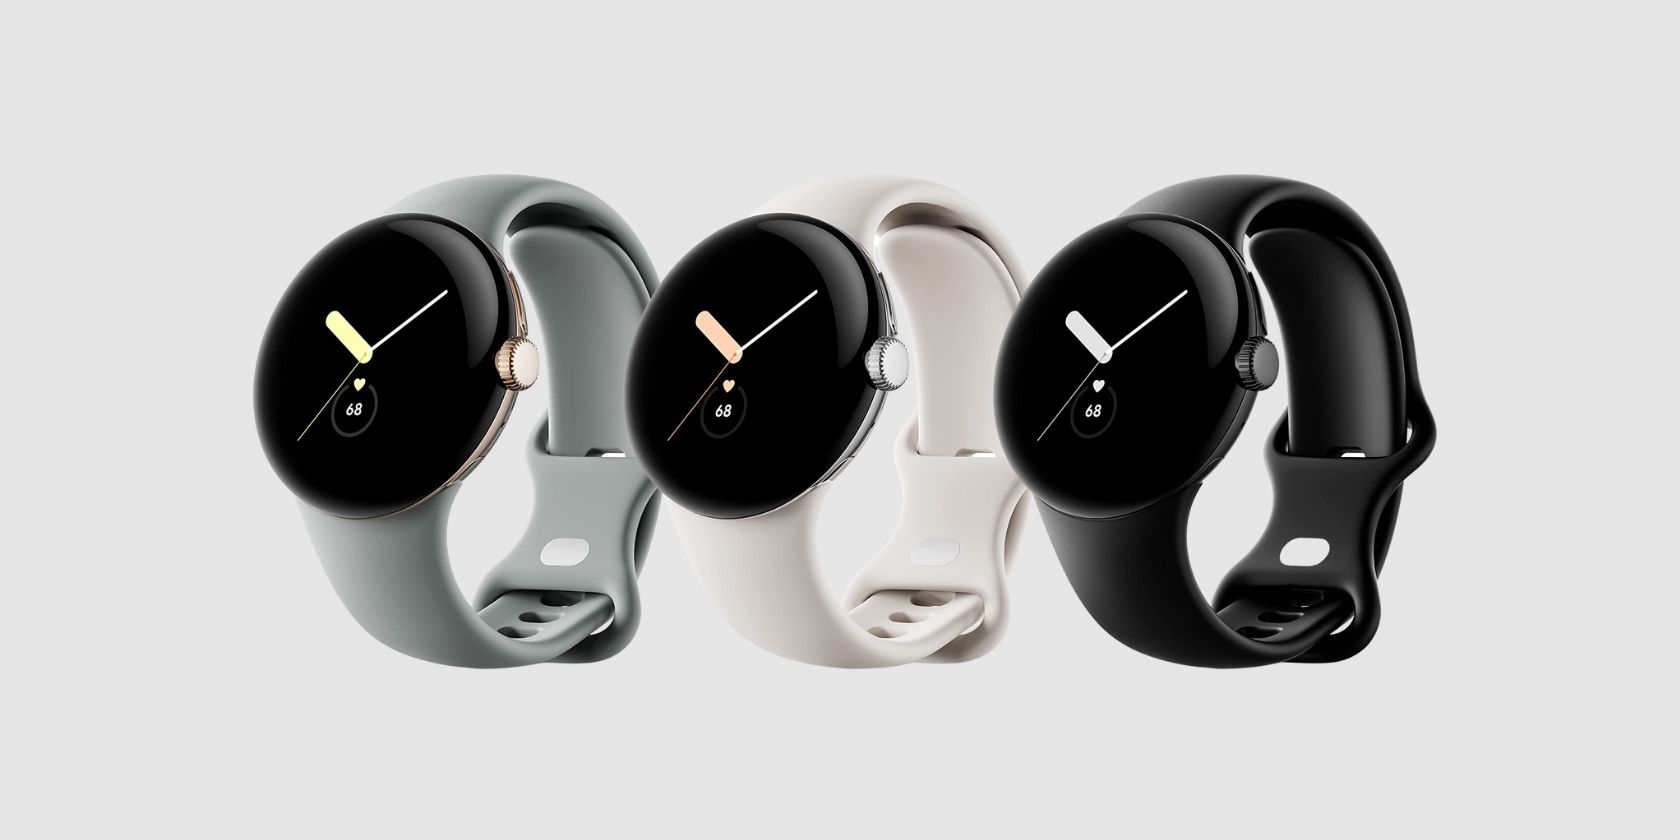 The three colors of Google Pixel Watch: gold, silver and black